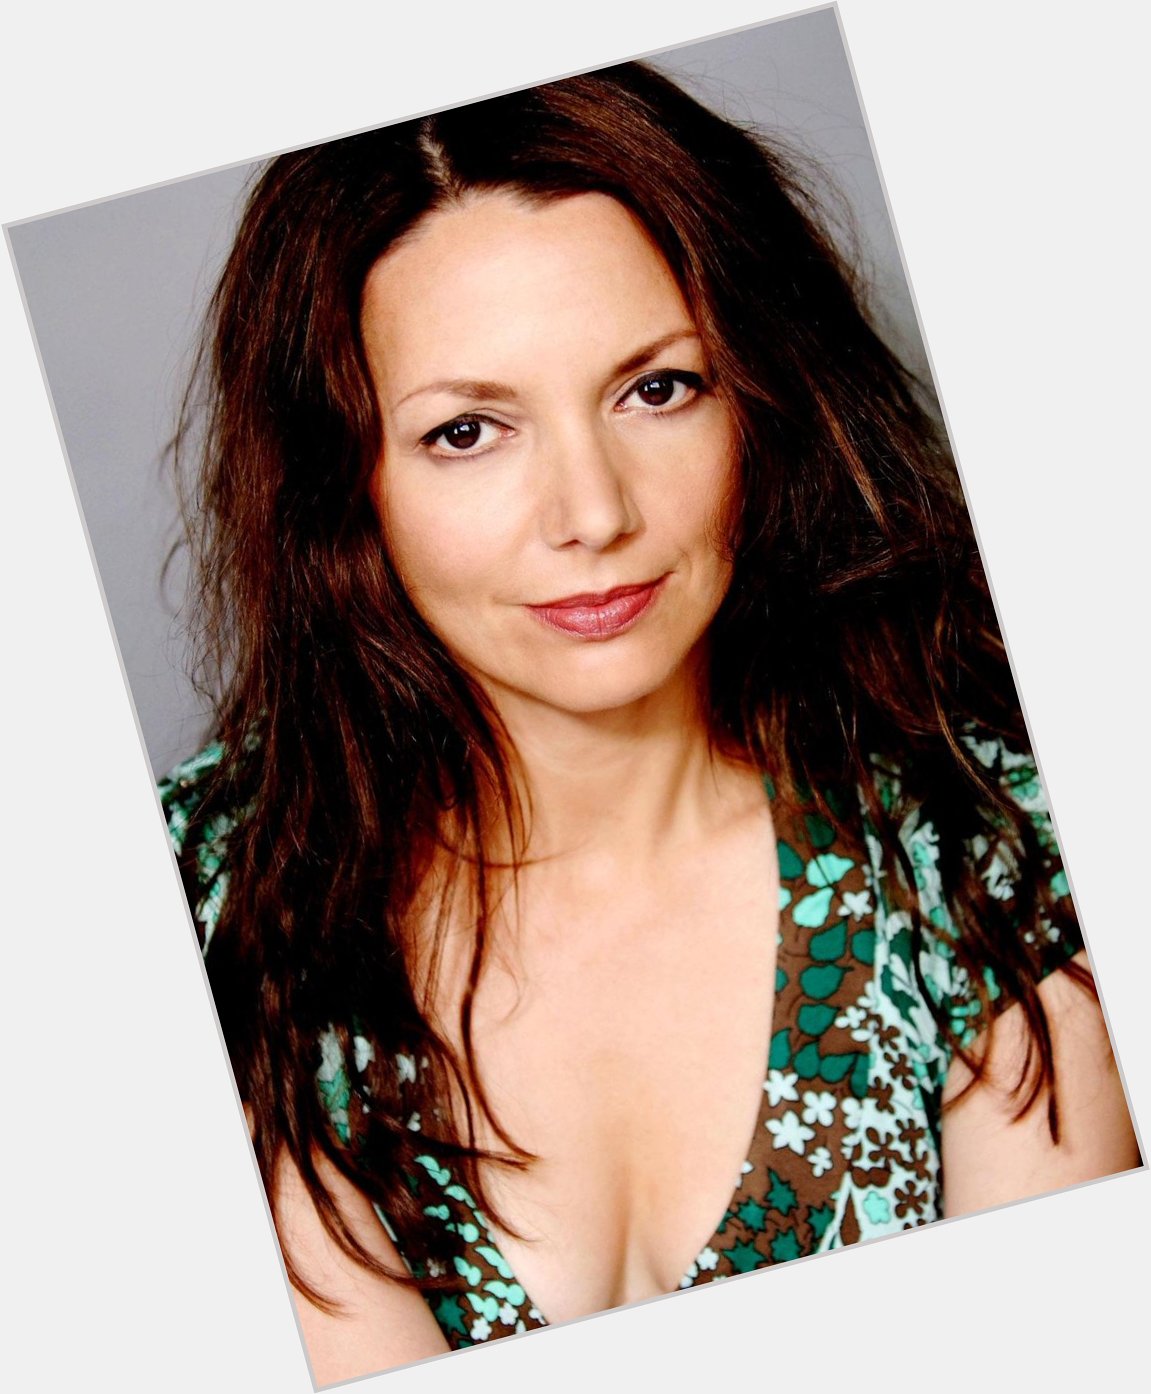 Happy birthday Joanne Whalley-Kilmer! \89 winner for WHAT THE BUTLER SAW 